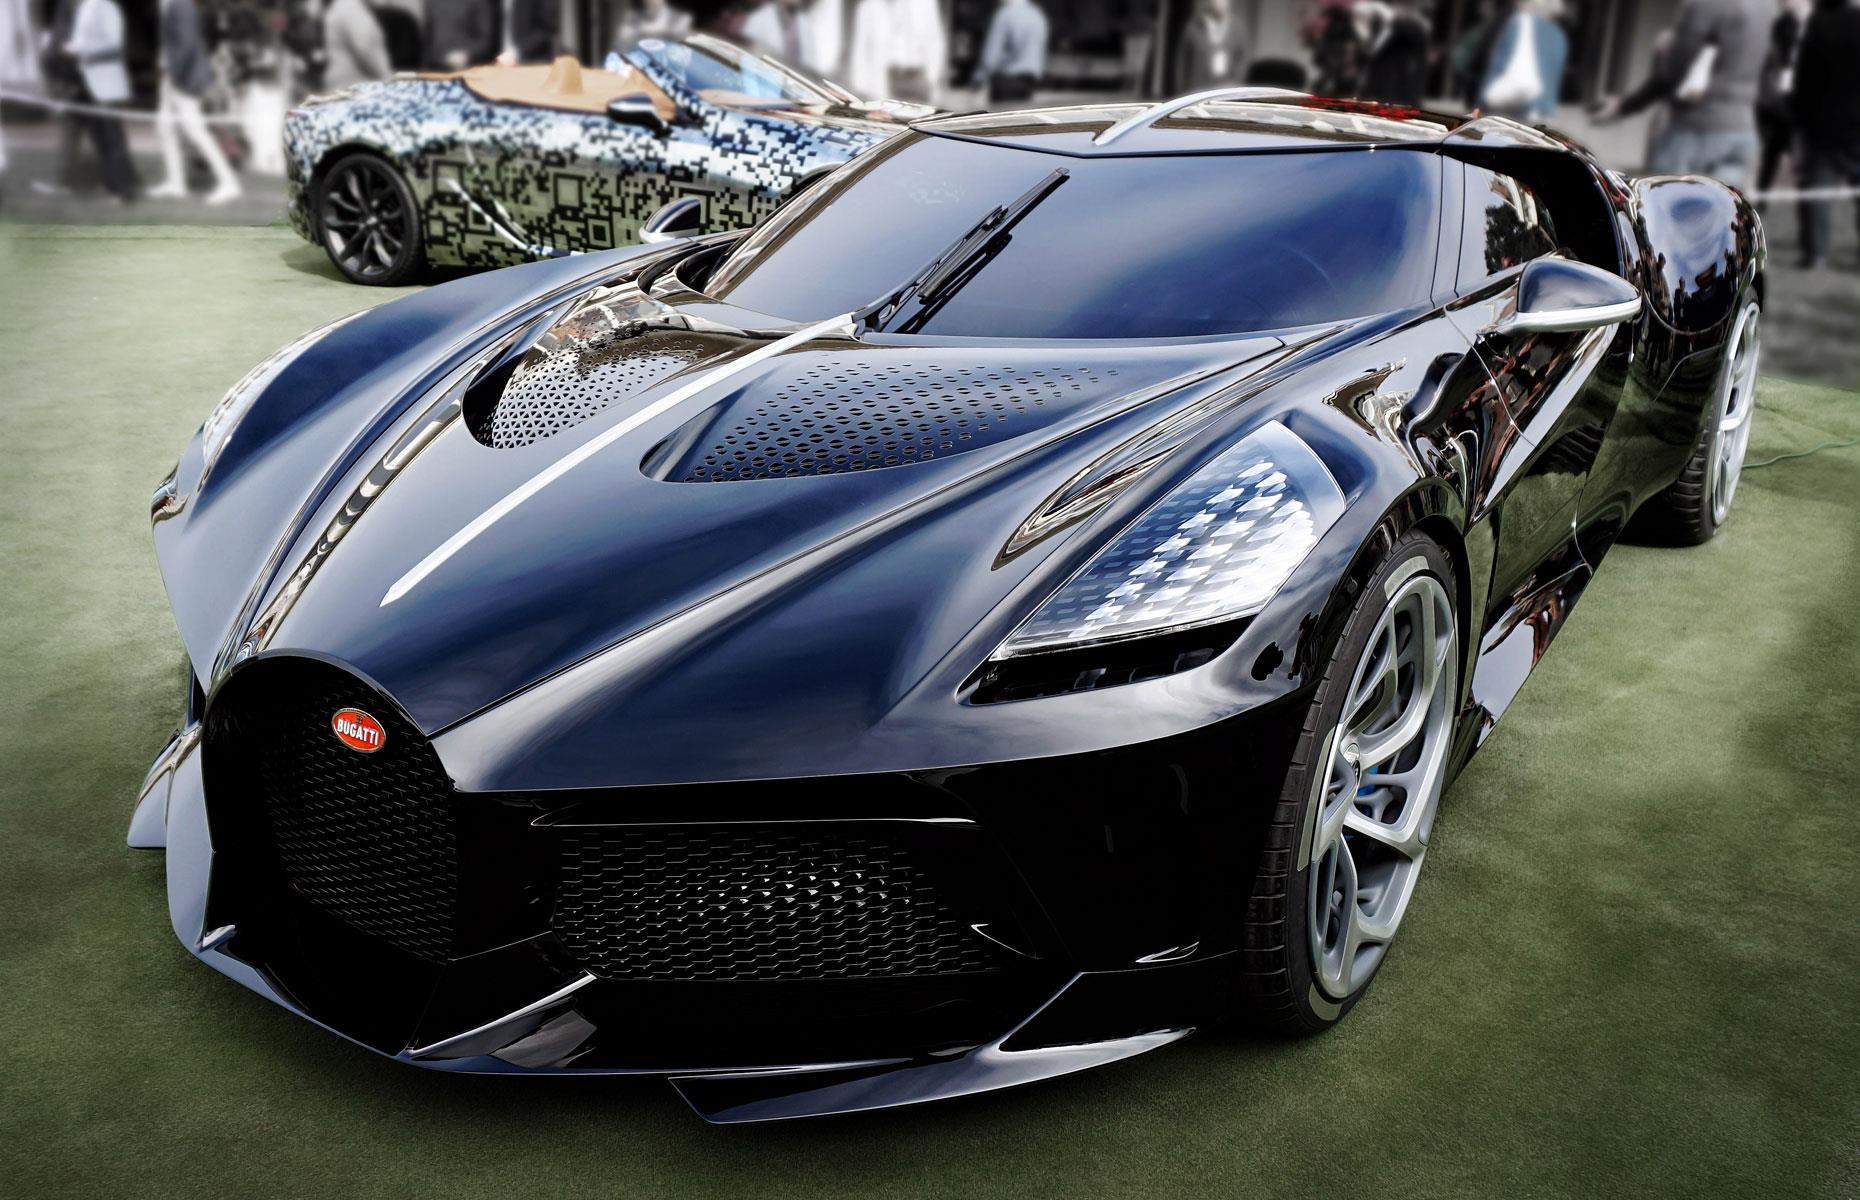 <p>Bugatti snatched the accolade in 2019 with its one-off La Voiture Noire ('The Black Car'). The $18.7 million (£14.1m) masterpiece, which draws inspiration from the classic Type 57 SC Atlantic, was custom-made for an unnamed billionaire client. Rumours, which later turned out to be untrue, had suggested that the car had been commissioned by footballer Cristiano Ronaldo. Since then it's been topped by Rolls-Royce...</p>